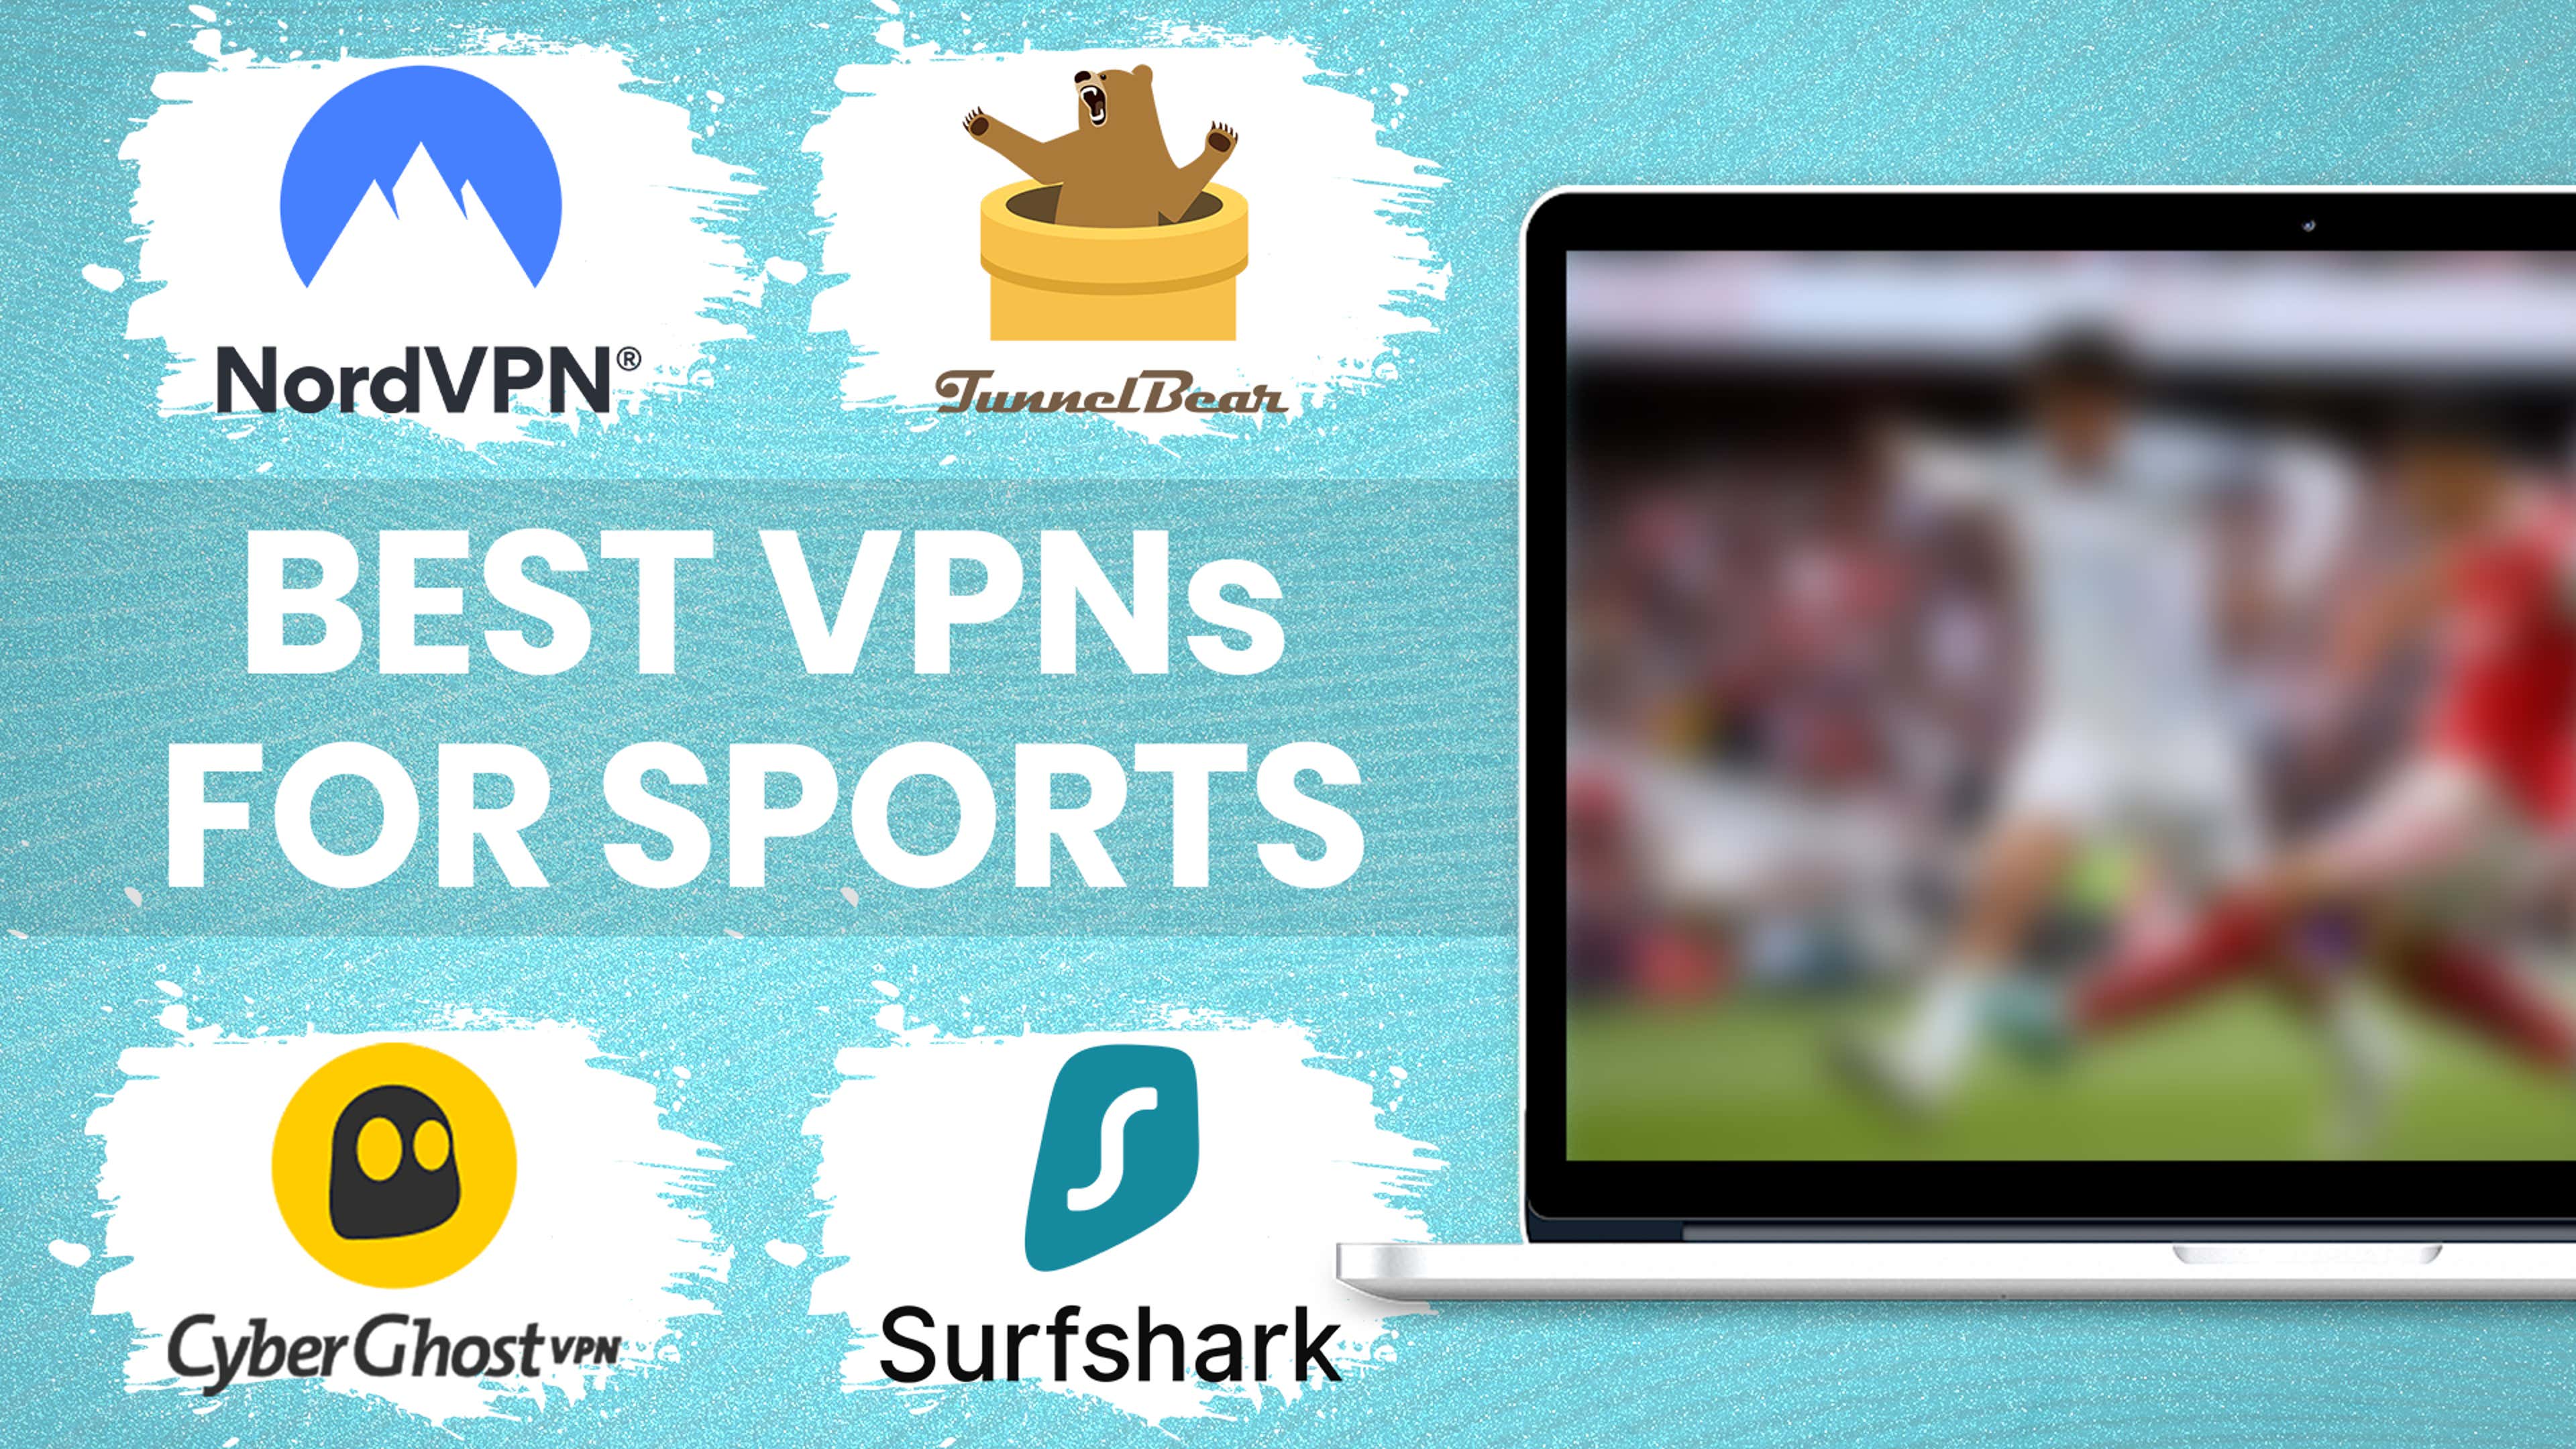 Best VPNs for sports